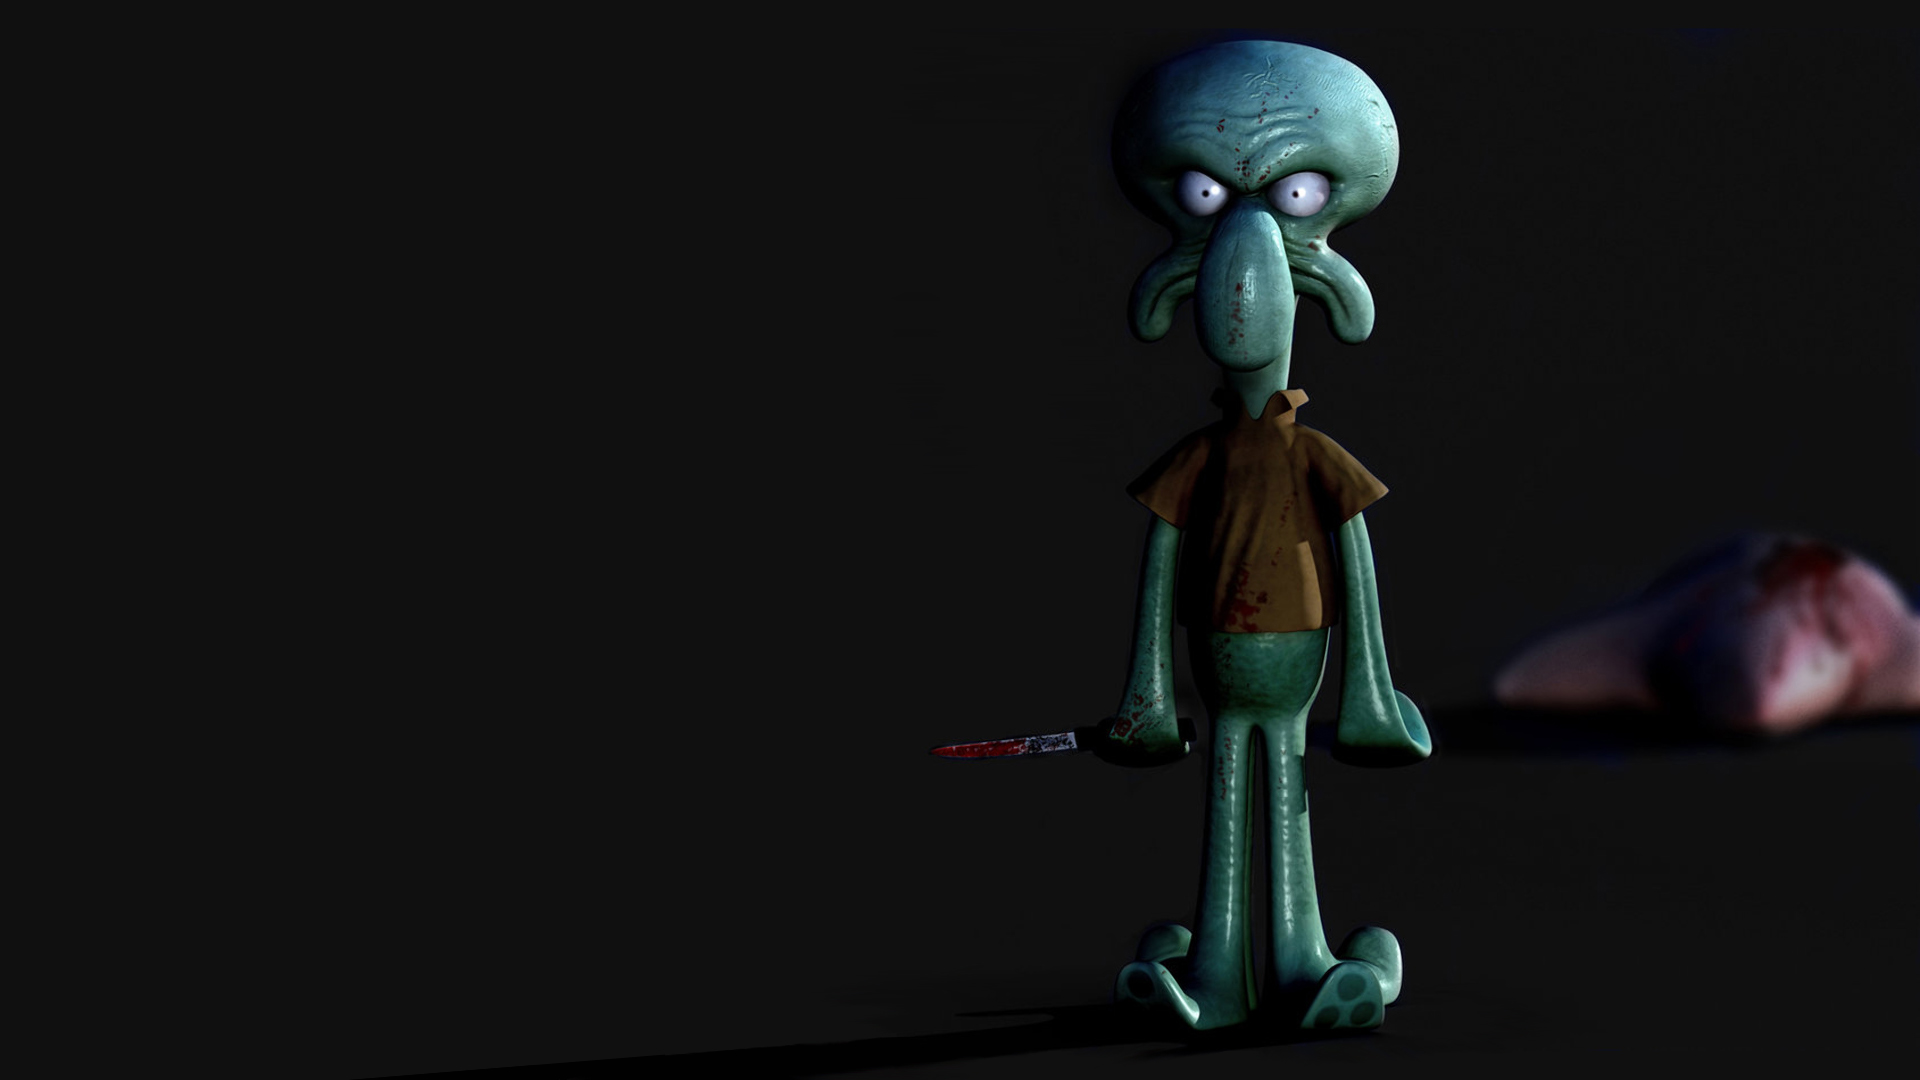 Scary Squidward Face